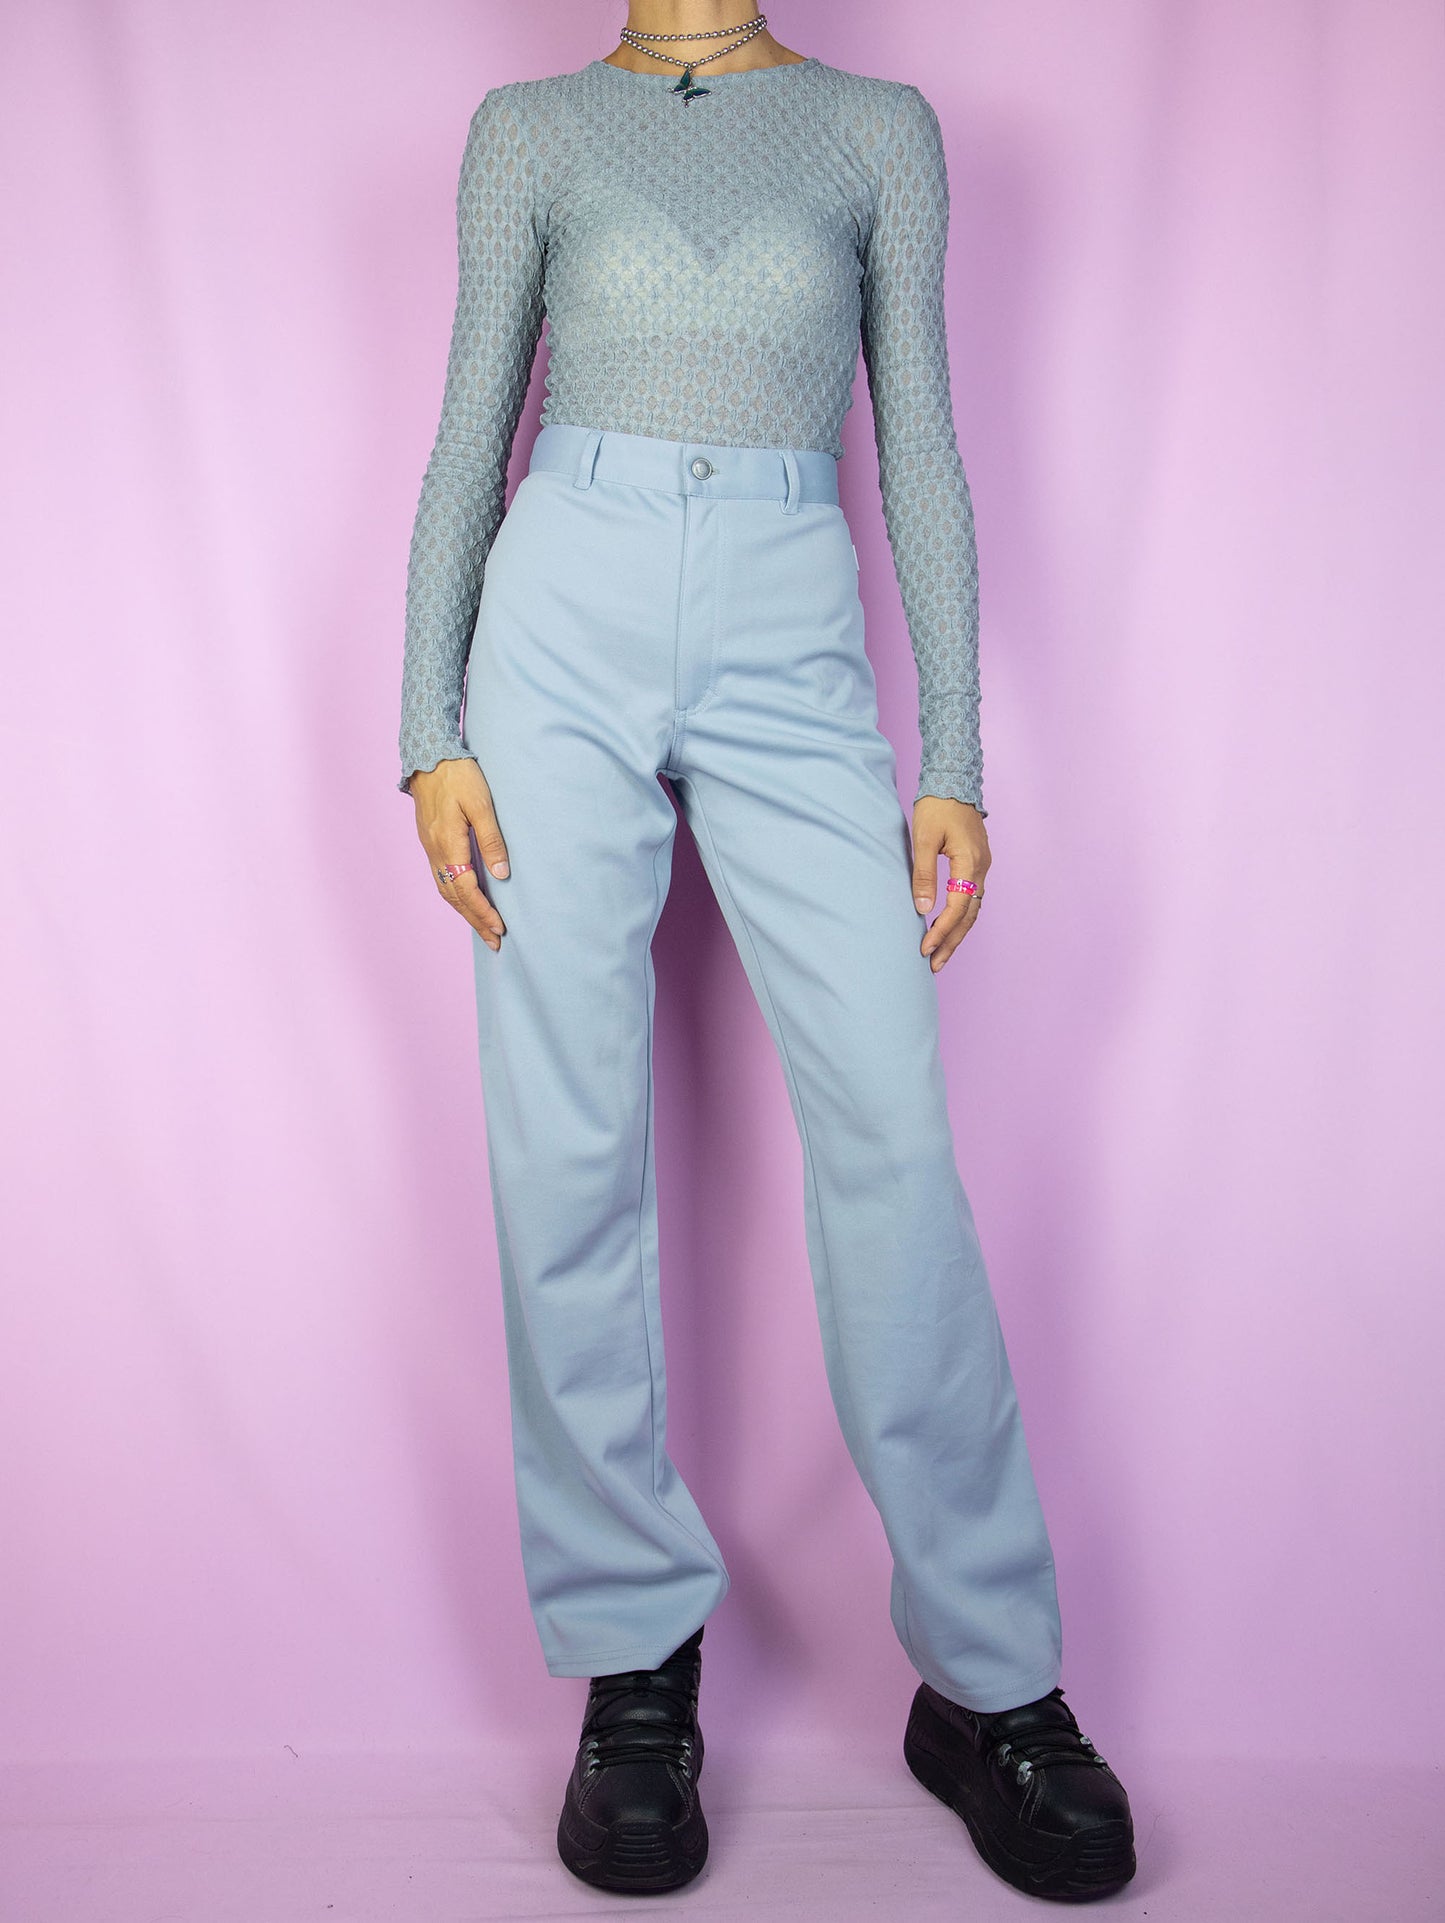 The Y2K Gray Pleated Straight Pants are vintage high-waisted straight-leg trousers in a blue-gray hue, featuring pleats and a front zipper closure. These pants offer a casual and classic retro office style from the 2000s.